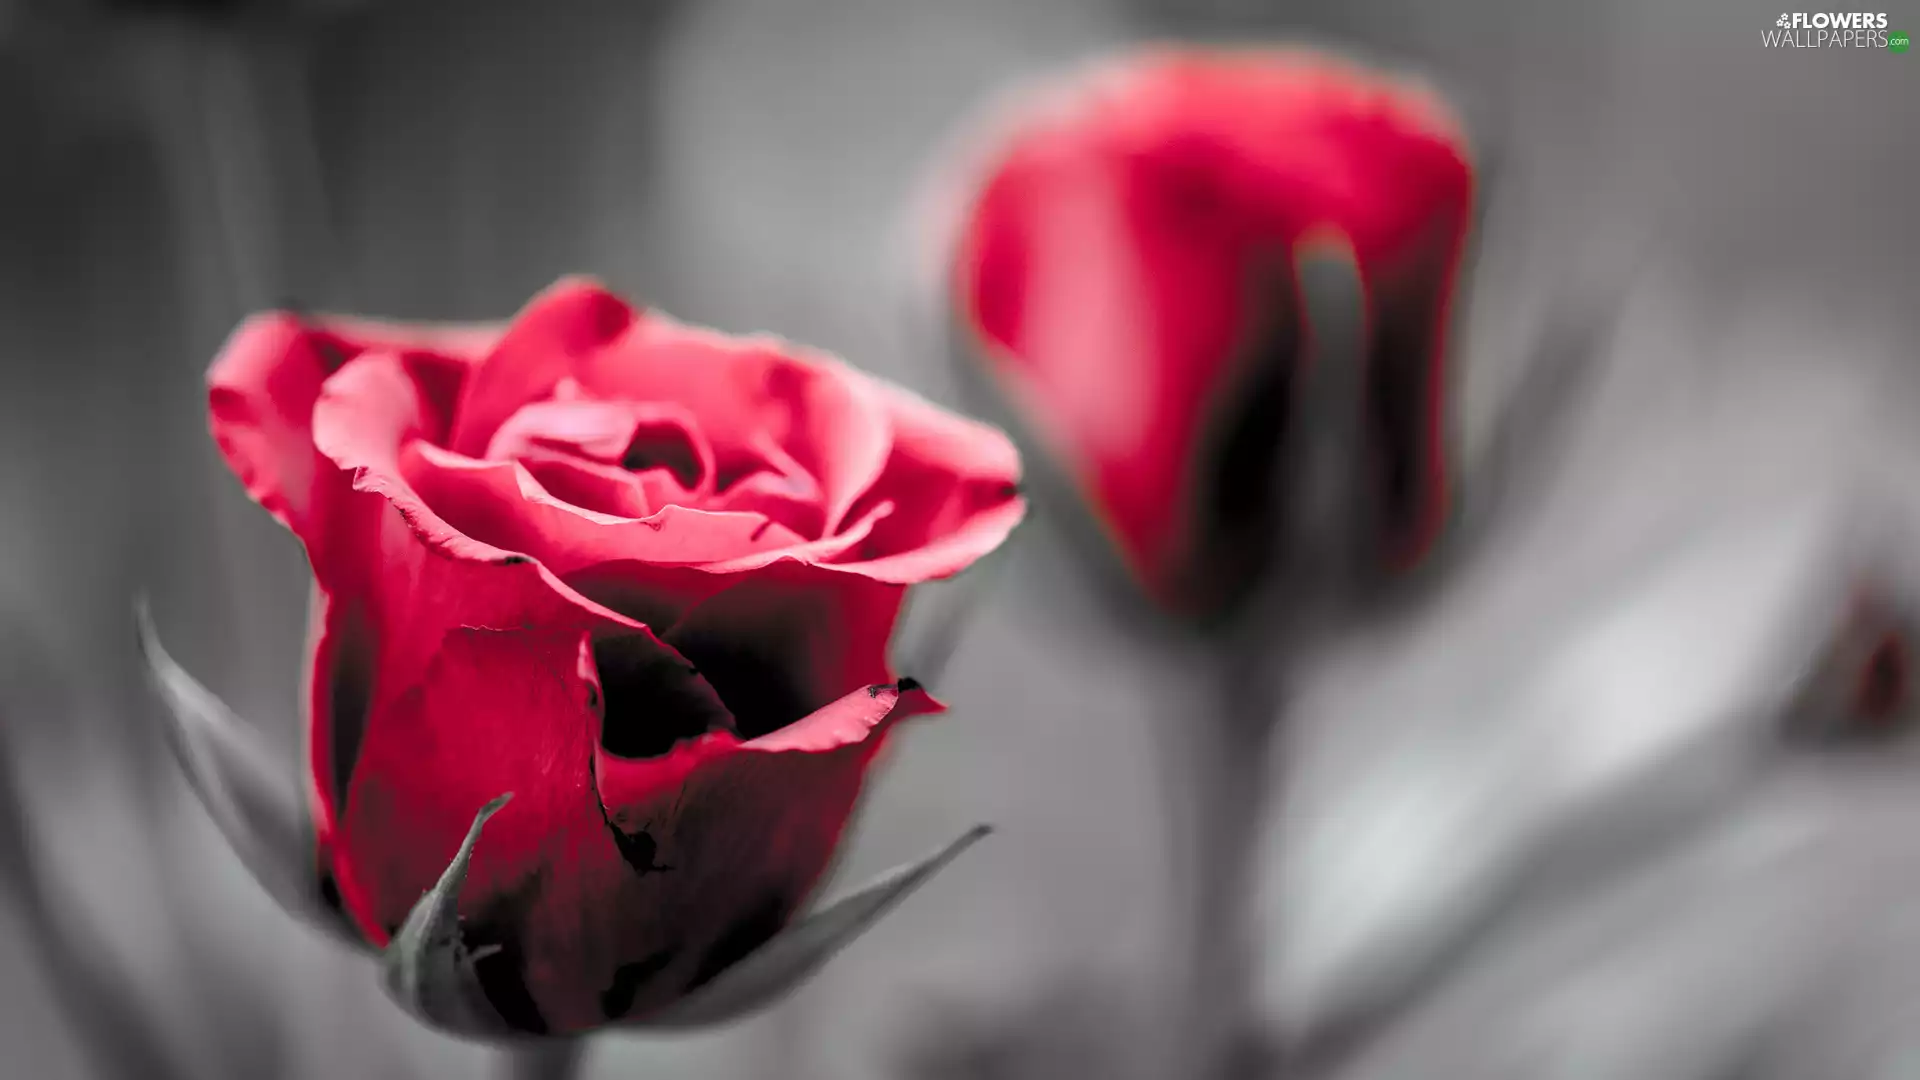 fuzzy, background, rose, bud, red hot